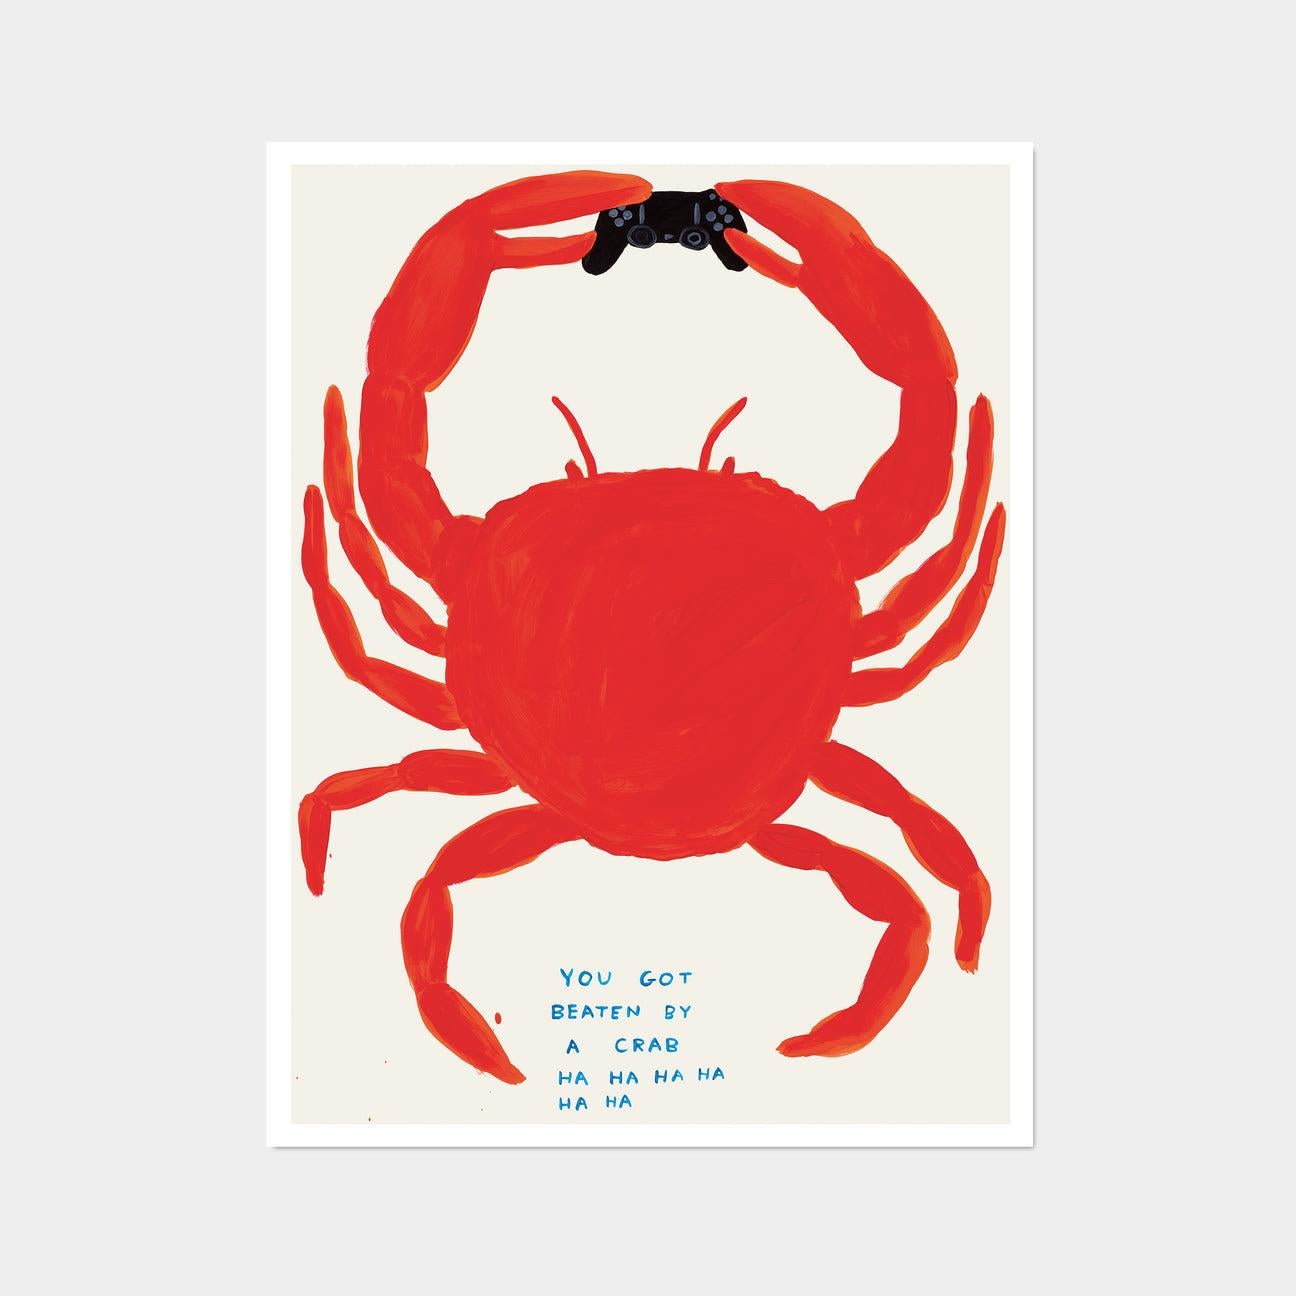 David Shrigley, You Got Beaten By A Crab, 2021

Off-set lithograph
Open edition, unframed 
60 x 80 cm (23.62 x 31.5 inches) 
Printed on 200g Munken Lynx paper by Narayana Press in Denmark  

David Shrigley’s work is humorous, interspersed with his